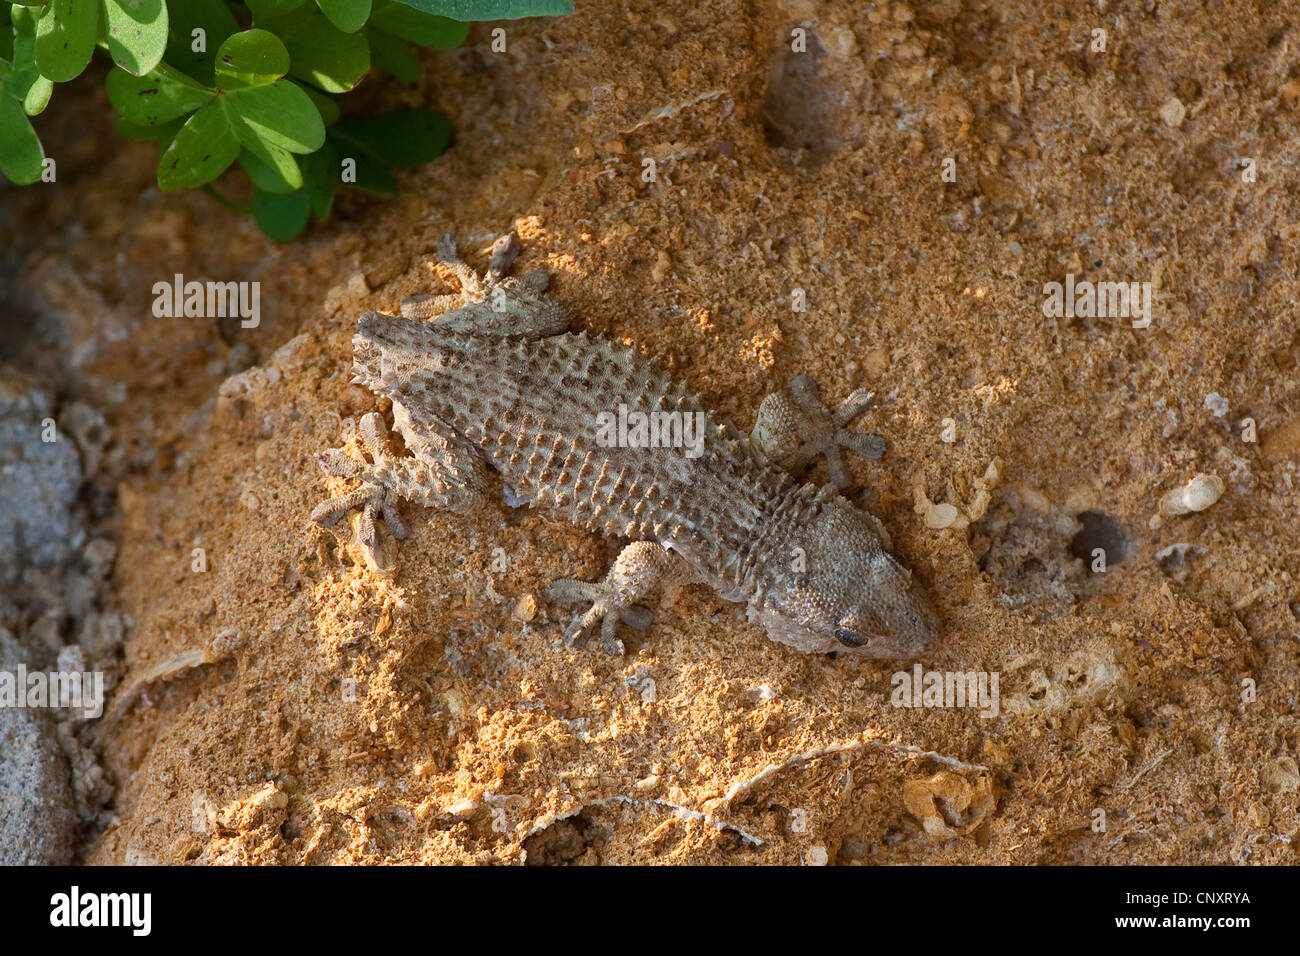 common wall gecko, Moorish gecko (Tarentola mauritanica), sitting on clay ground with the tail lost due to autotomy Stock Photo